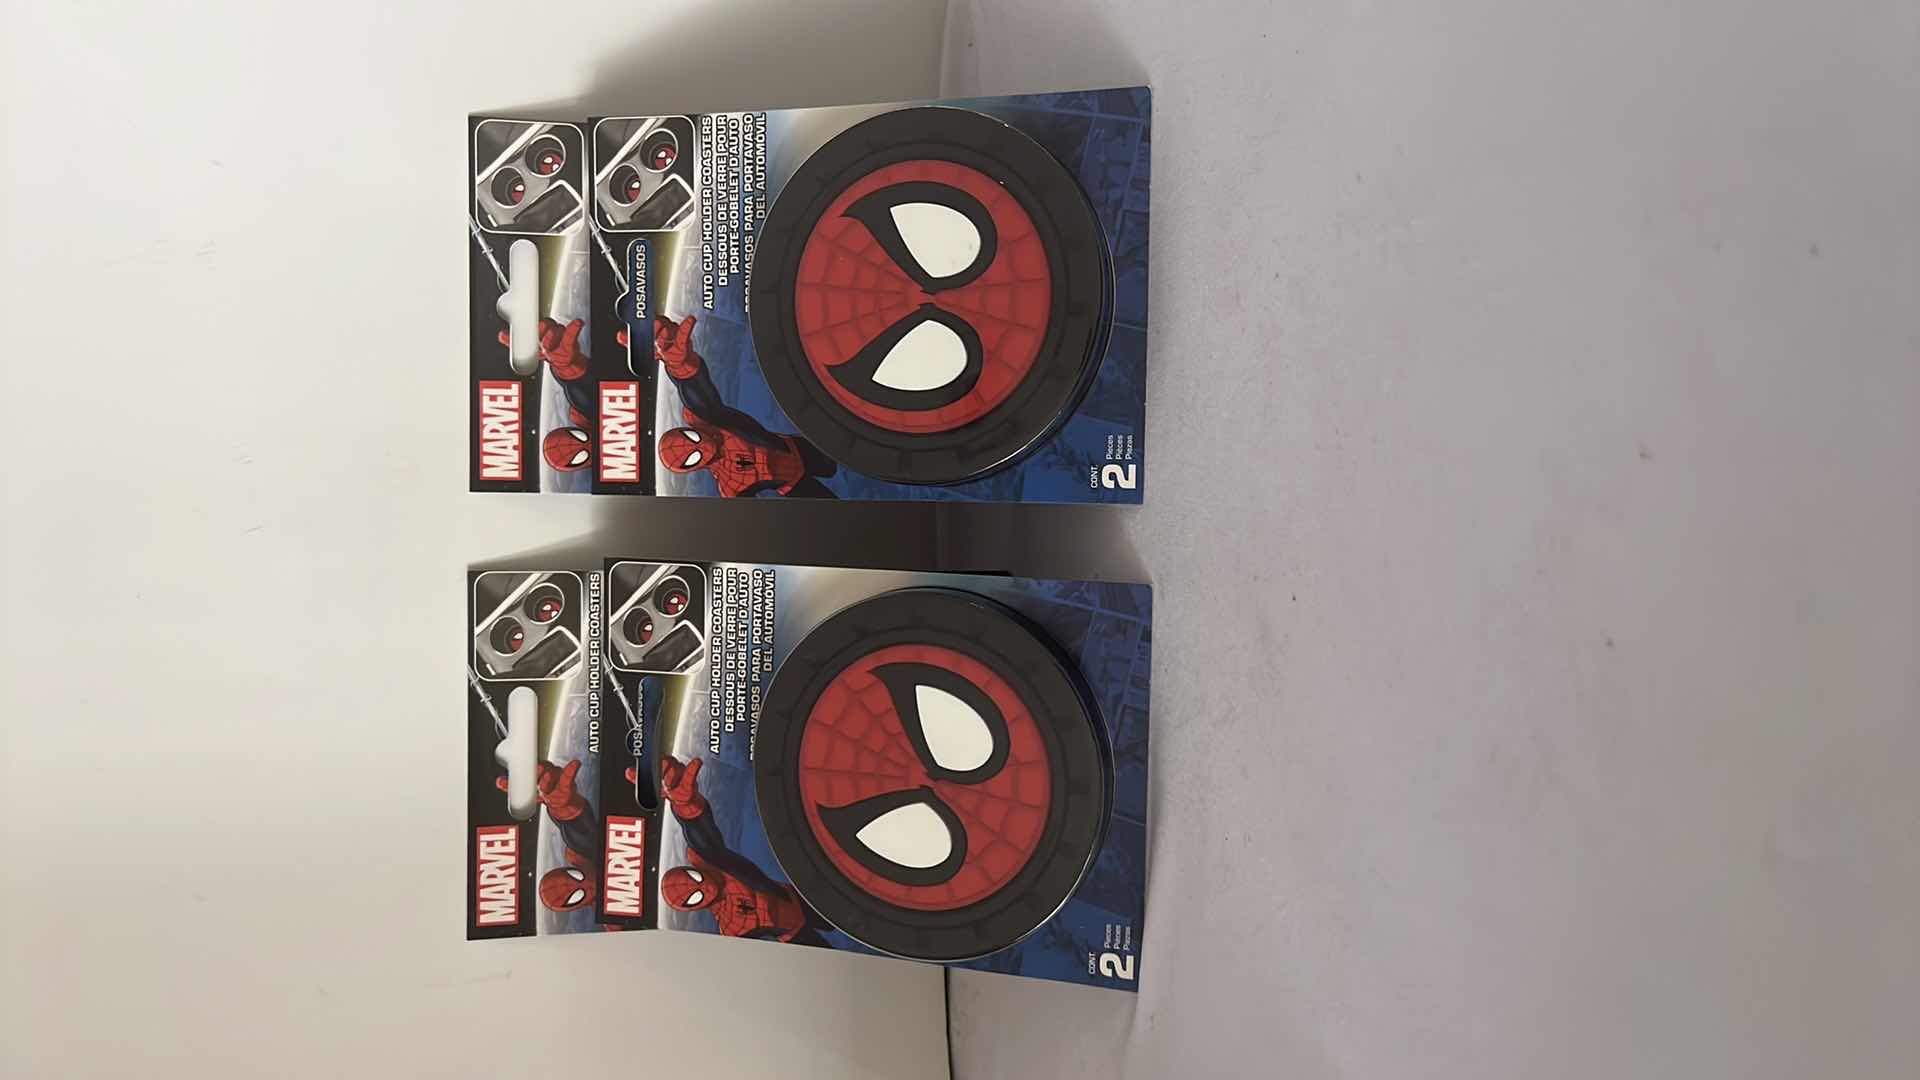 Photo 1 of 4-BRAND NEW MARVEL SPIDER-MAN 2-PACK CAR CUP COASTER SETS $40 (8 TOTAL CAR COASTERS)